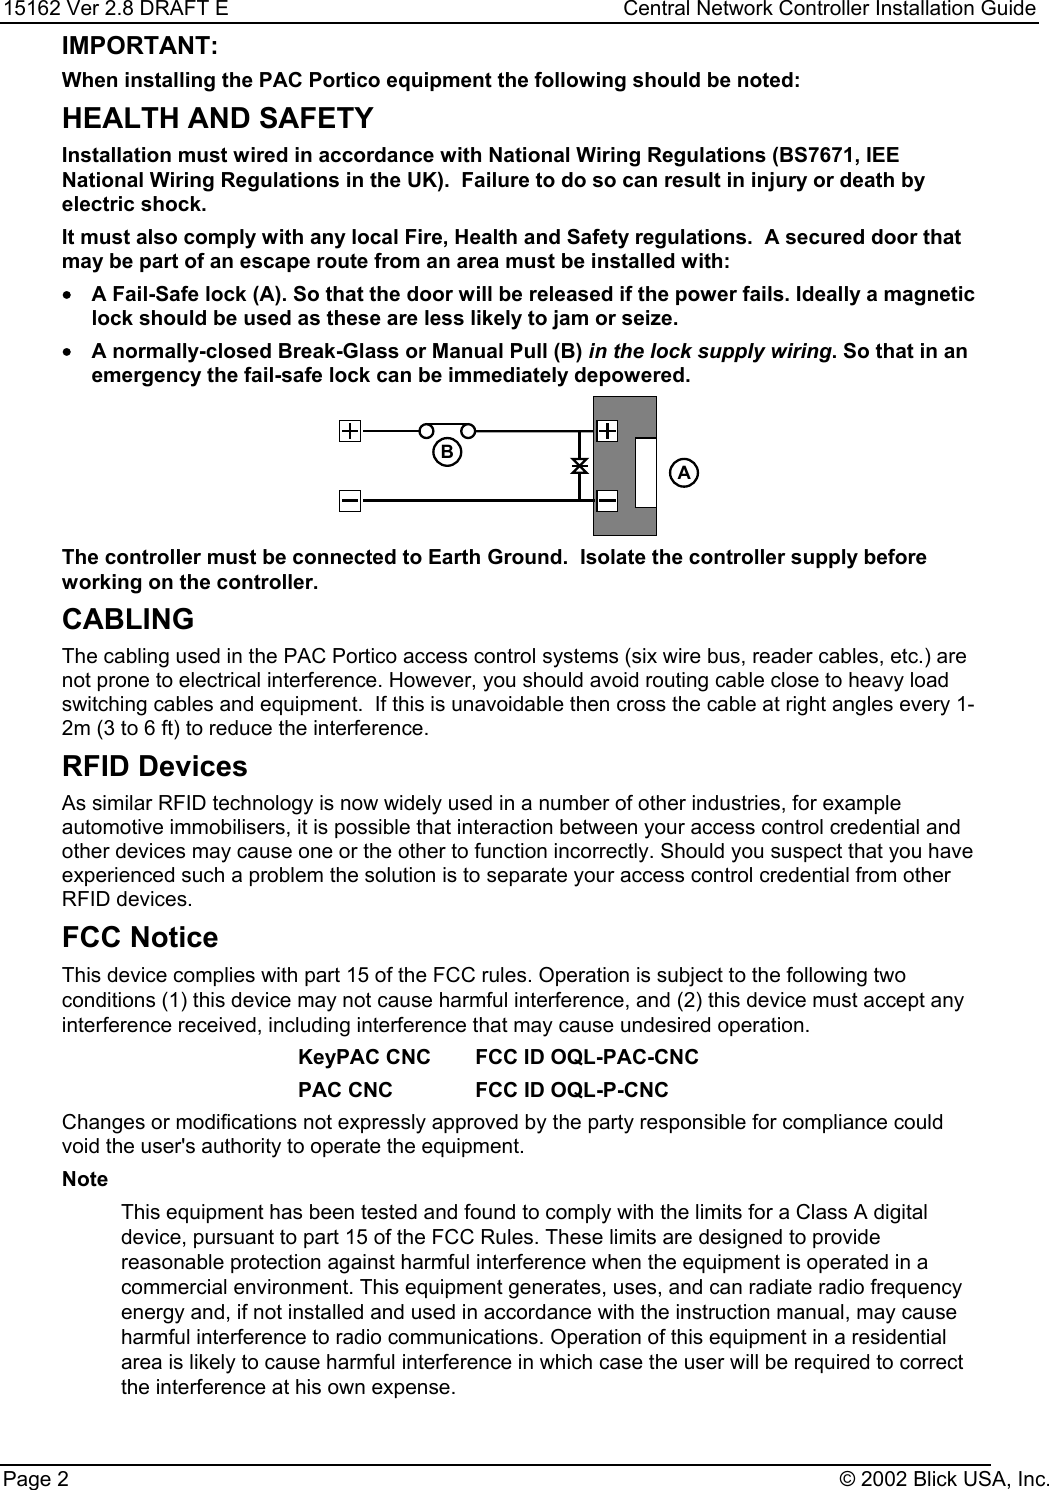 15162 Ver 2.8 DRAFT E Central Network Controller Installation GuidePage 2 © 2002 Blick USA, Inc.IMPORTANT:When installing the PAC Portico equipment the following should be noted:HEALTH AND SAFETYInstallation must wired in accordance with National Wiring Regulations (BS7671, IEENational Wiring Regulations in the UK).  Failure to do so can result in injury or death byelectric shock.It must also comply with any local Fire, Health and Safety regulations.  A secured door thatmay be part of an escape route from an area must be installed with:•A Fail-Safe lock (A). So that the door will be released if the power fails. Ideally a magneticlock should be used as these are less likely to jam or seize.•A normally-closed Break-Glass or Manual Pull (B) in the lock supply wiring. So that in anemergency the fail-safe lock can be immediately depowered.BAThe controller must be connected to Earth Ground.  Isolate the controller supply beforeworking on the controller.CABLINGThe cabling used in the PAC Portico access control systems (six wire bus, reader cables, etc.) arenot prone to electrical interference. However, you should avoid routing cable close to heavy loadswitching cables and equipment.  If this is unavoidable then cross the cable at right angles every 1-2m (3 to 6 ft) to reduce the interference.RFID DevicesAs similar RFID technology is now widely used in a number of other industries, for exampleautomotive immobilisers, it is possible that interaction between your access control credential andother devices may cause one or the other to function incorrectly. Should you suspect that you haveexperienced such a problem the solution is to separate your access control credential from otherRFID devices.FCC NoticeThis device complies with part 15 of the FCC rules. Operation is subject to the following twoconditions (1) this device may not cause harmful interference, and (2) this device must accept anyinterference received, including interference that may cause undesired operation.KeyPAC CNC FCC ID OQL-PAC-CNCPAC CNC FCC ID OQL-P-CNCChanges or modifications not expressly approved by the party responsible for compliance couldvoid the user&apos;s authority to operate the equipment.NoteThis equipment has been tested and found to comply with the limits for a Class A digitaldevice, pursuant to part 15 of the FCC Rules. These limits are designed to providereasonable protection against harmful interference when the equipment is operated in acommercial environment. This equipment generates, uses, and can radiate radio frequencyenergy and, if not installed and used in accordance with the instruction manual, may causeharmful interference to radio communications. Operation of this equipment in a residentialarea is likely to cause harmful interference in which case the user will be required to correctthe interference at his own expense.